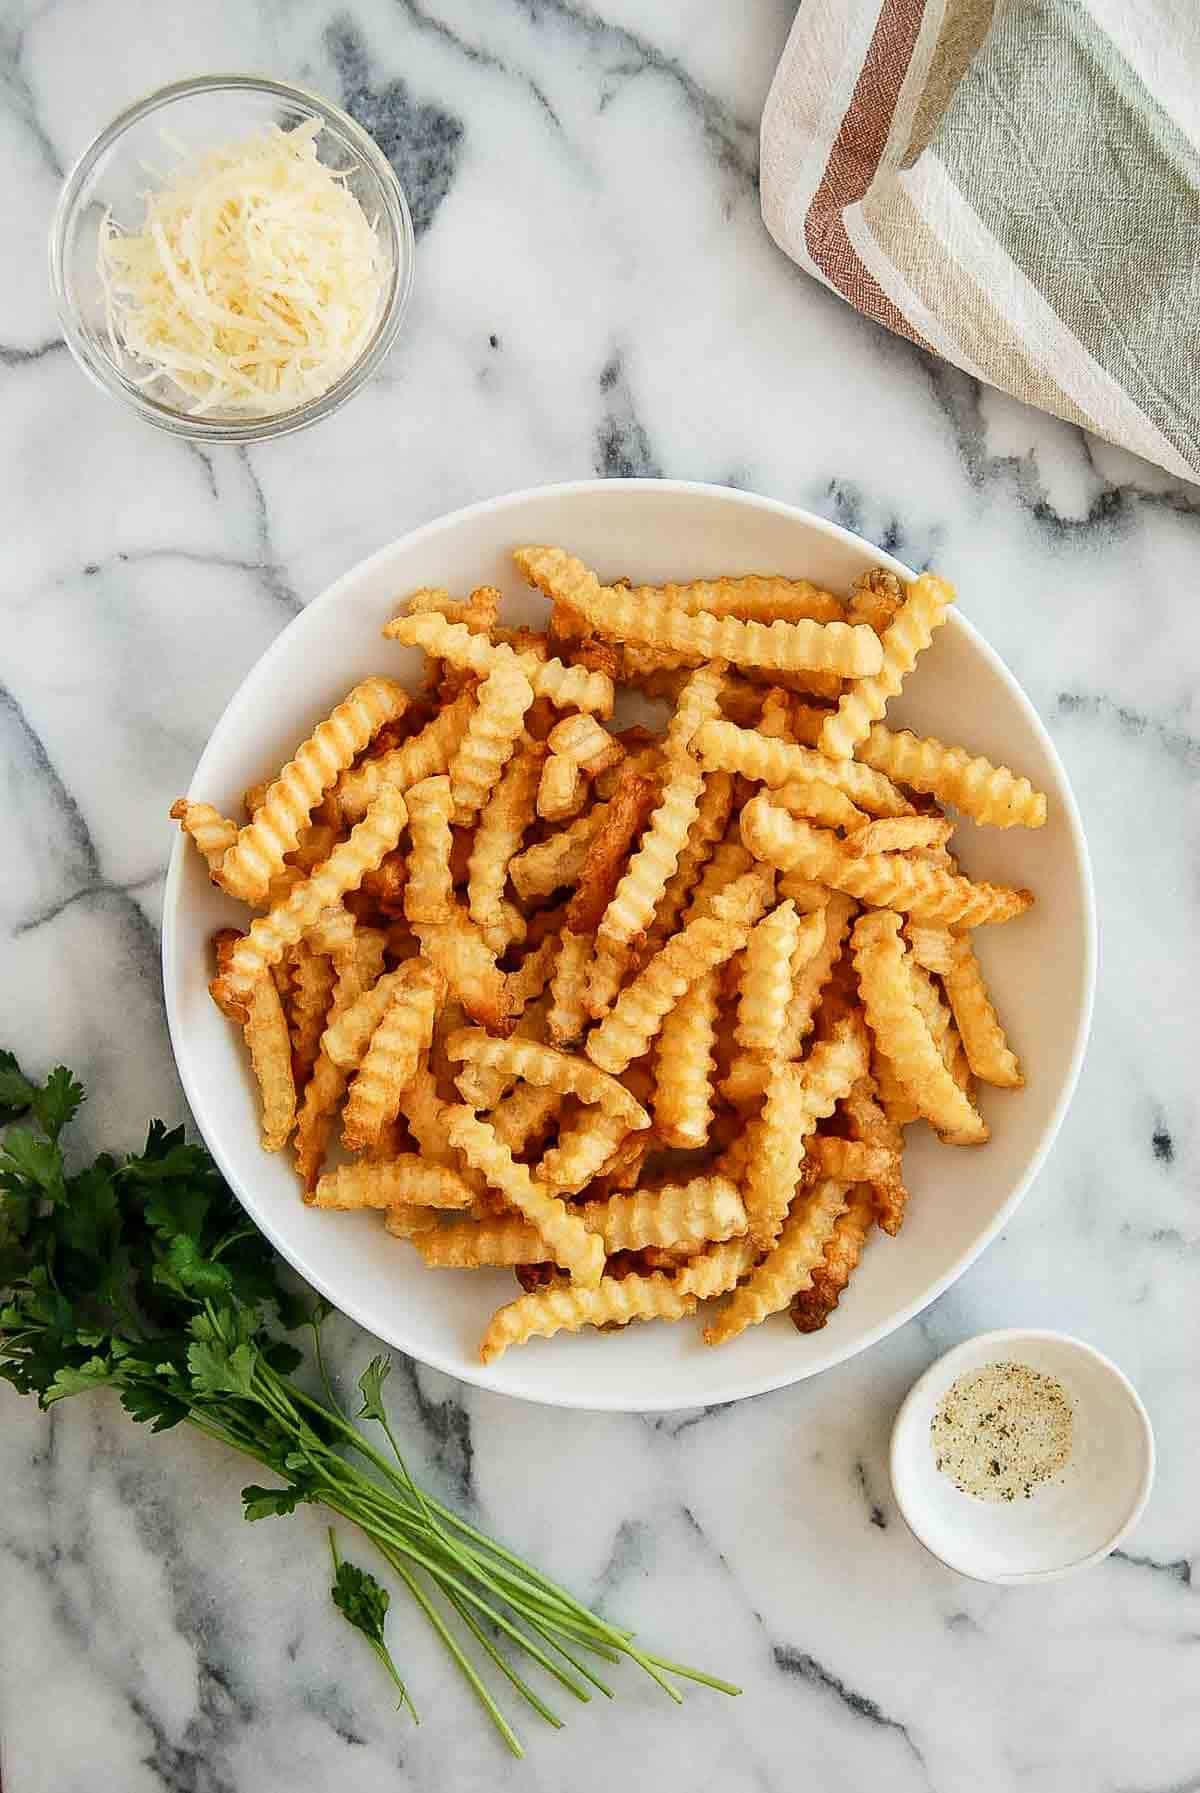 freshly fried air fryer french fries on countertop.